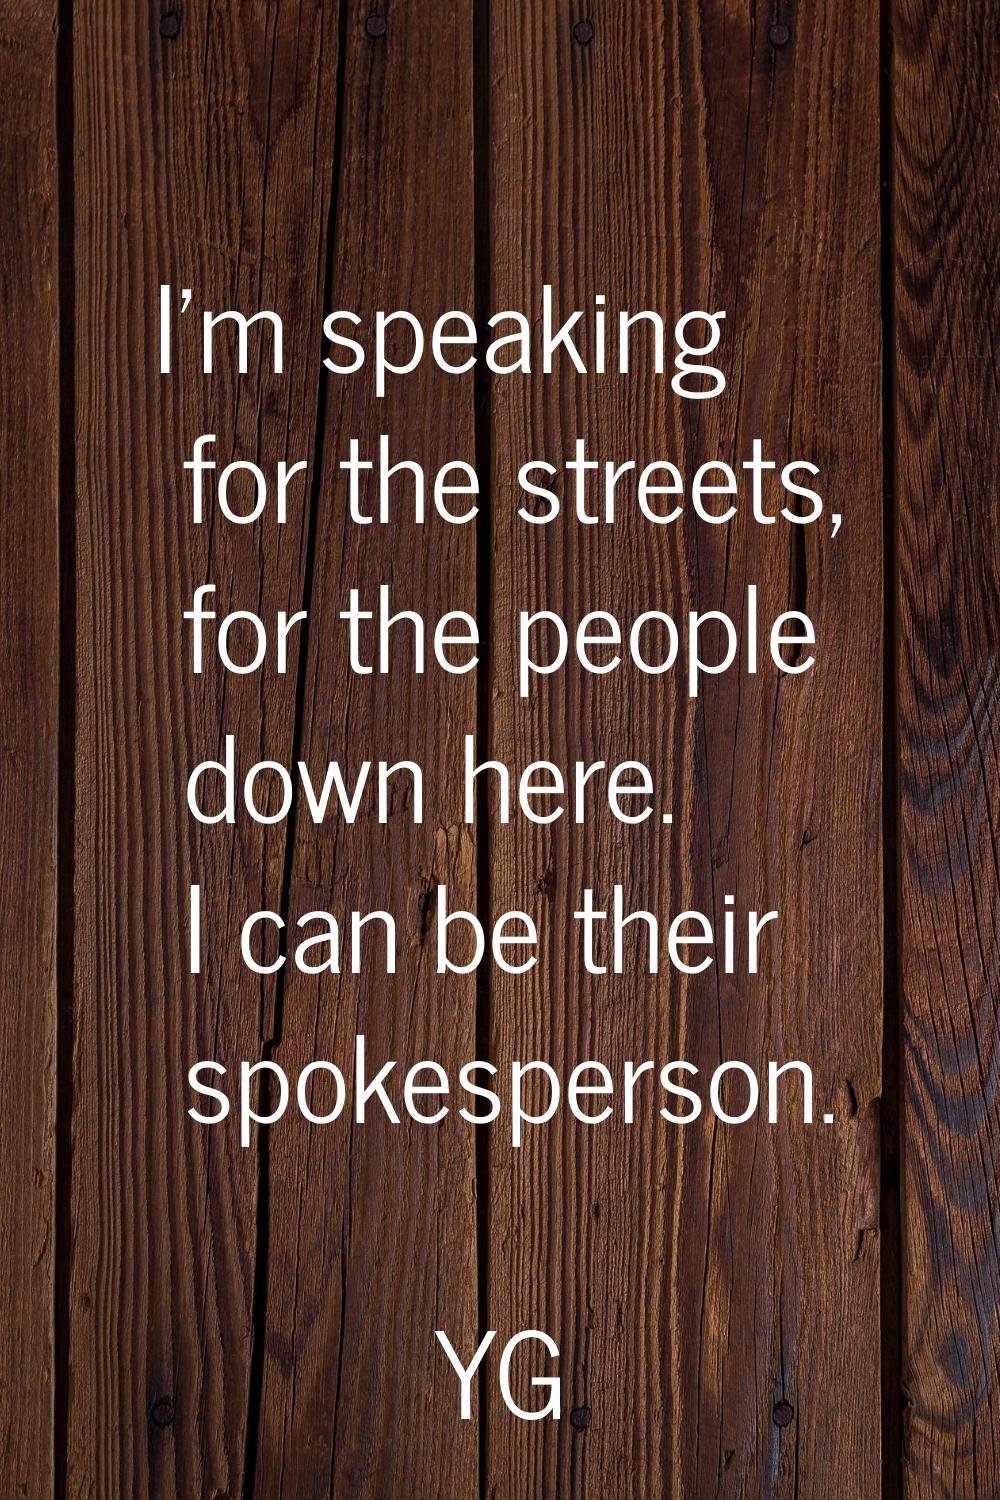 I'm speaking for the streets, for the people down here. I can be their spokesperson.